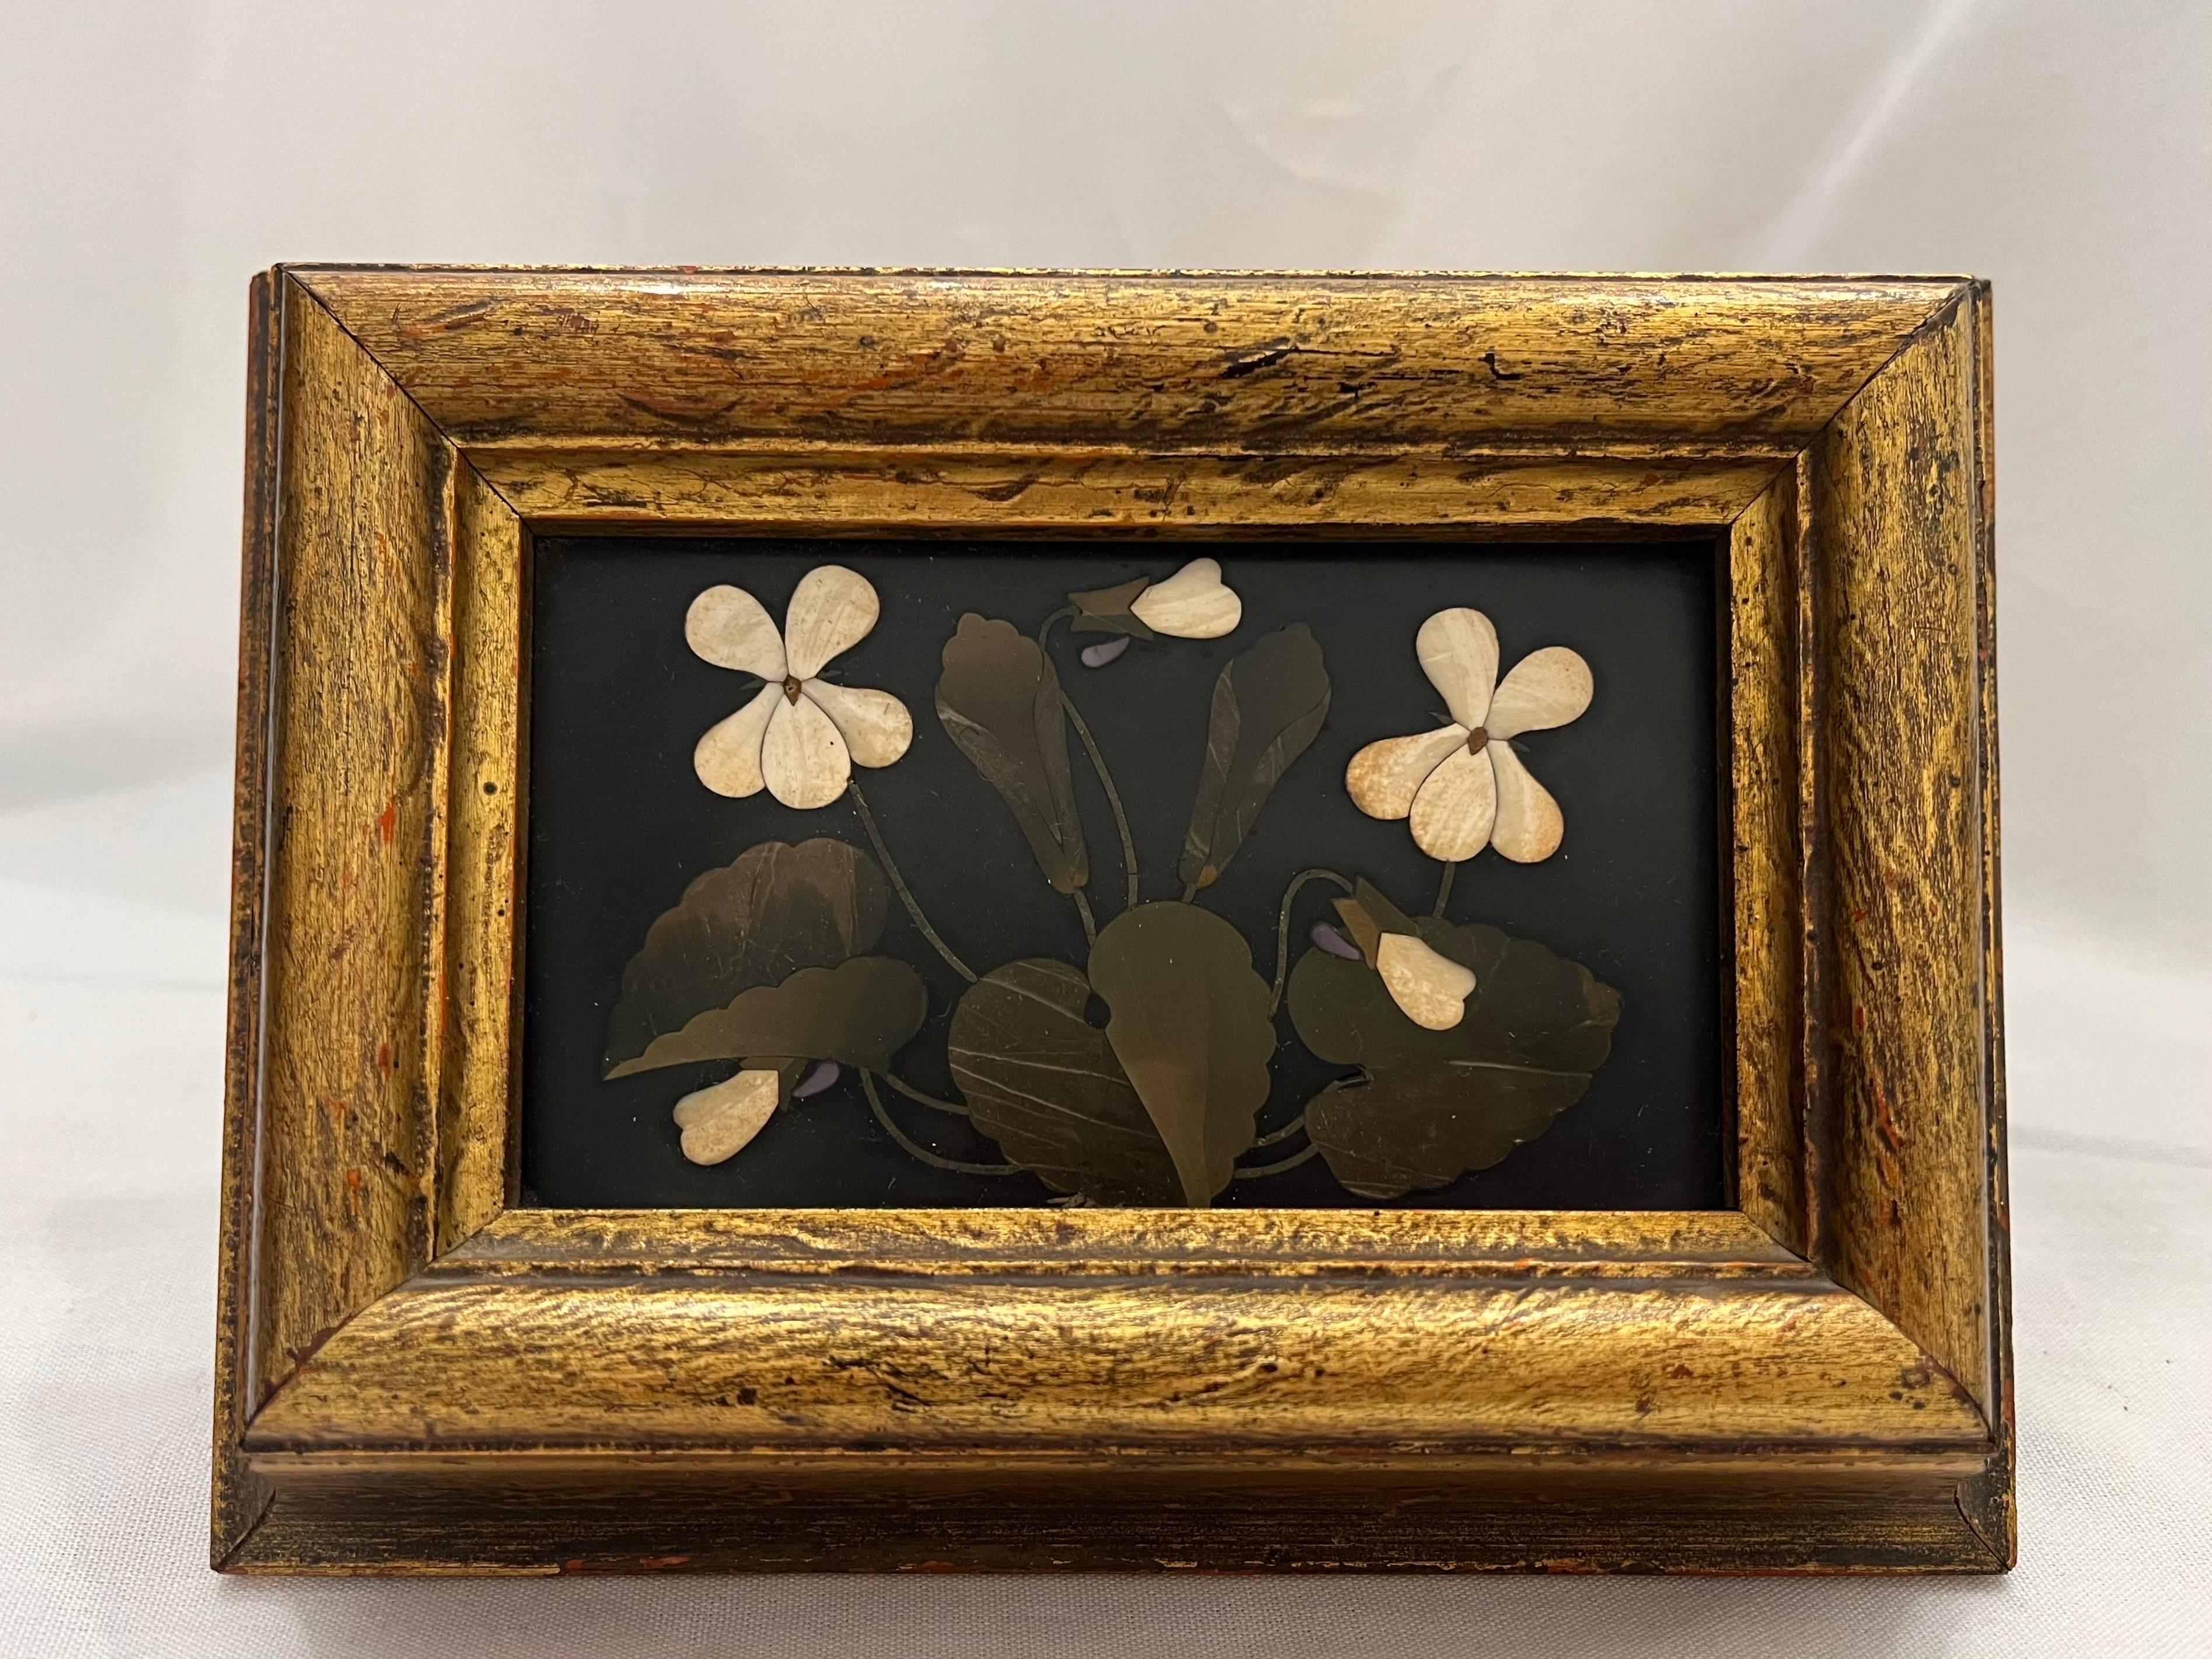 An antique, late 19th century Italian pietra dura hard stone floral still life in a frame. This incredibly beautiful pietra dura features a spray of flowers and foliage set against a deep and mysterious black background. I believe this black stone